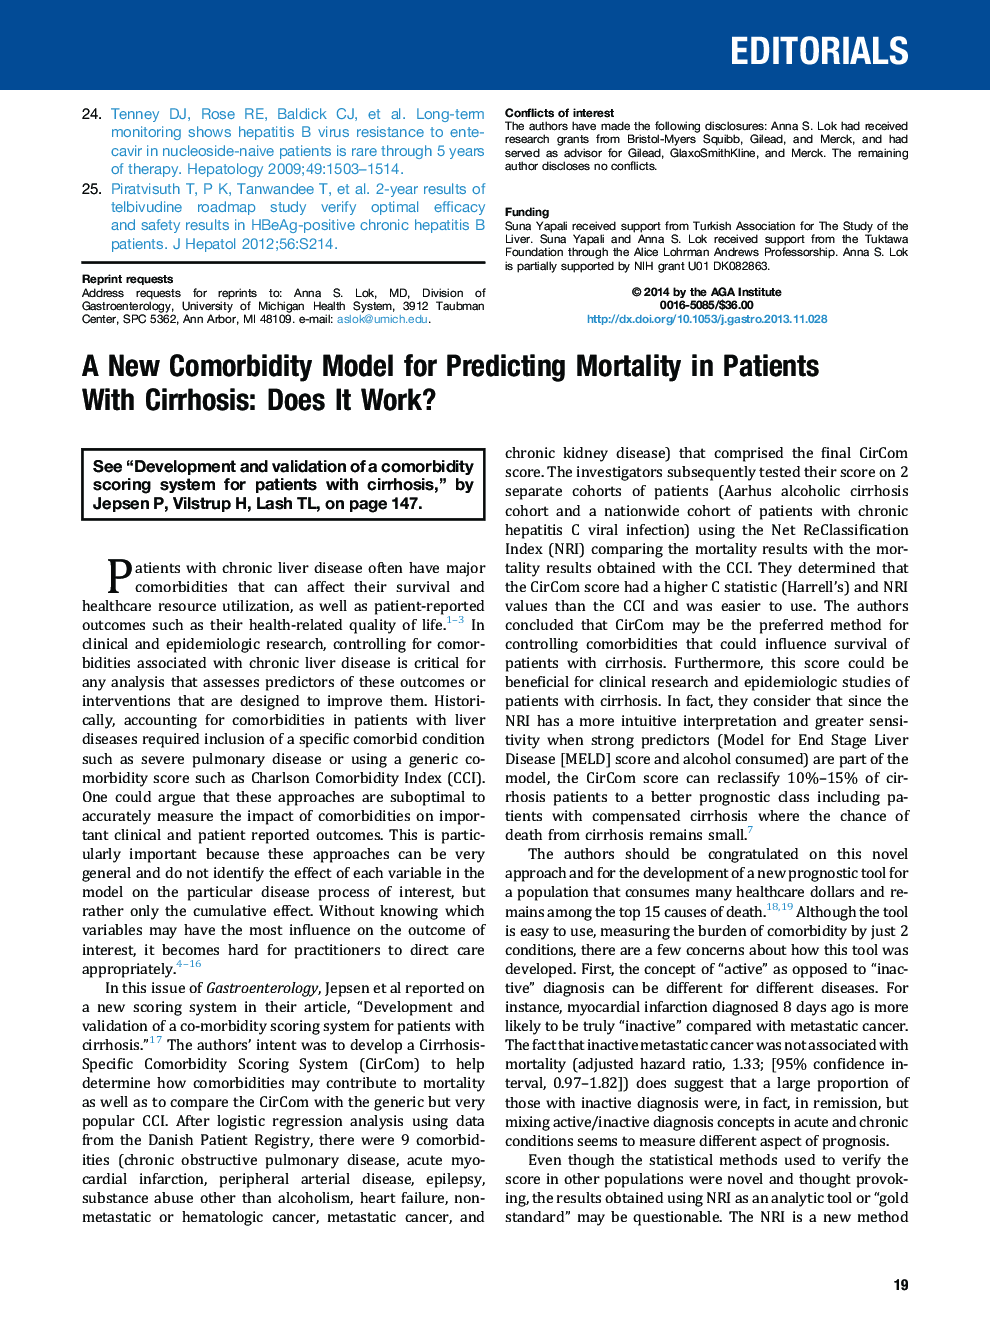 A New Comorbidity Model for Predicting Mortality in Patients With Cirrhosis: Does It Work?